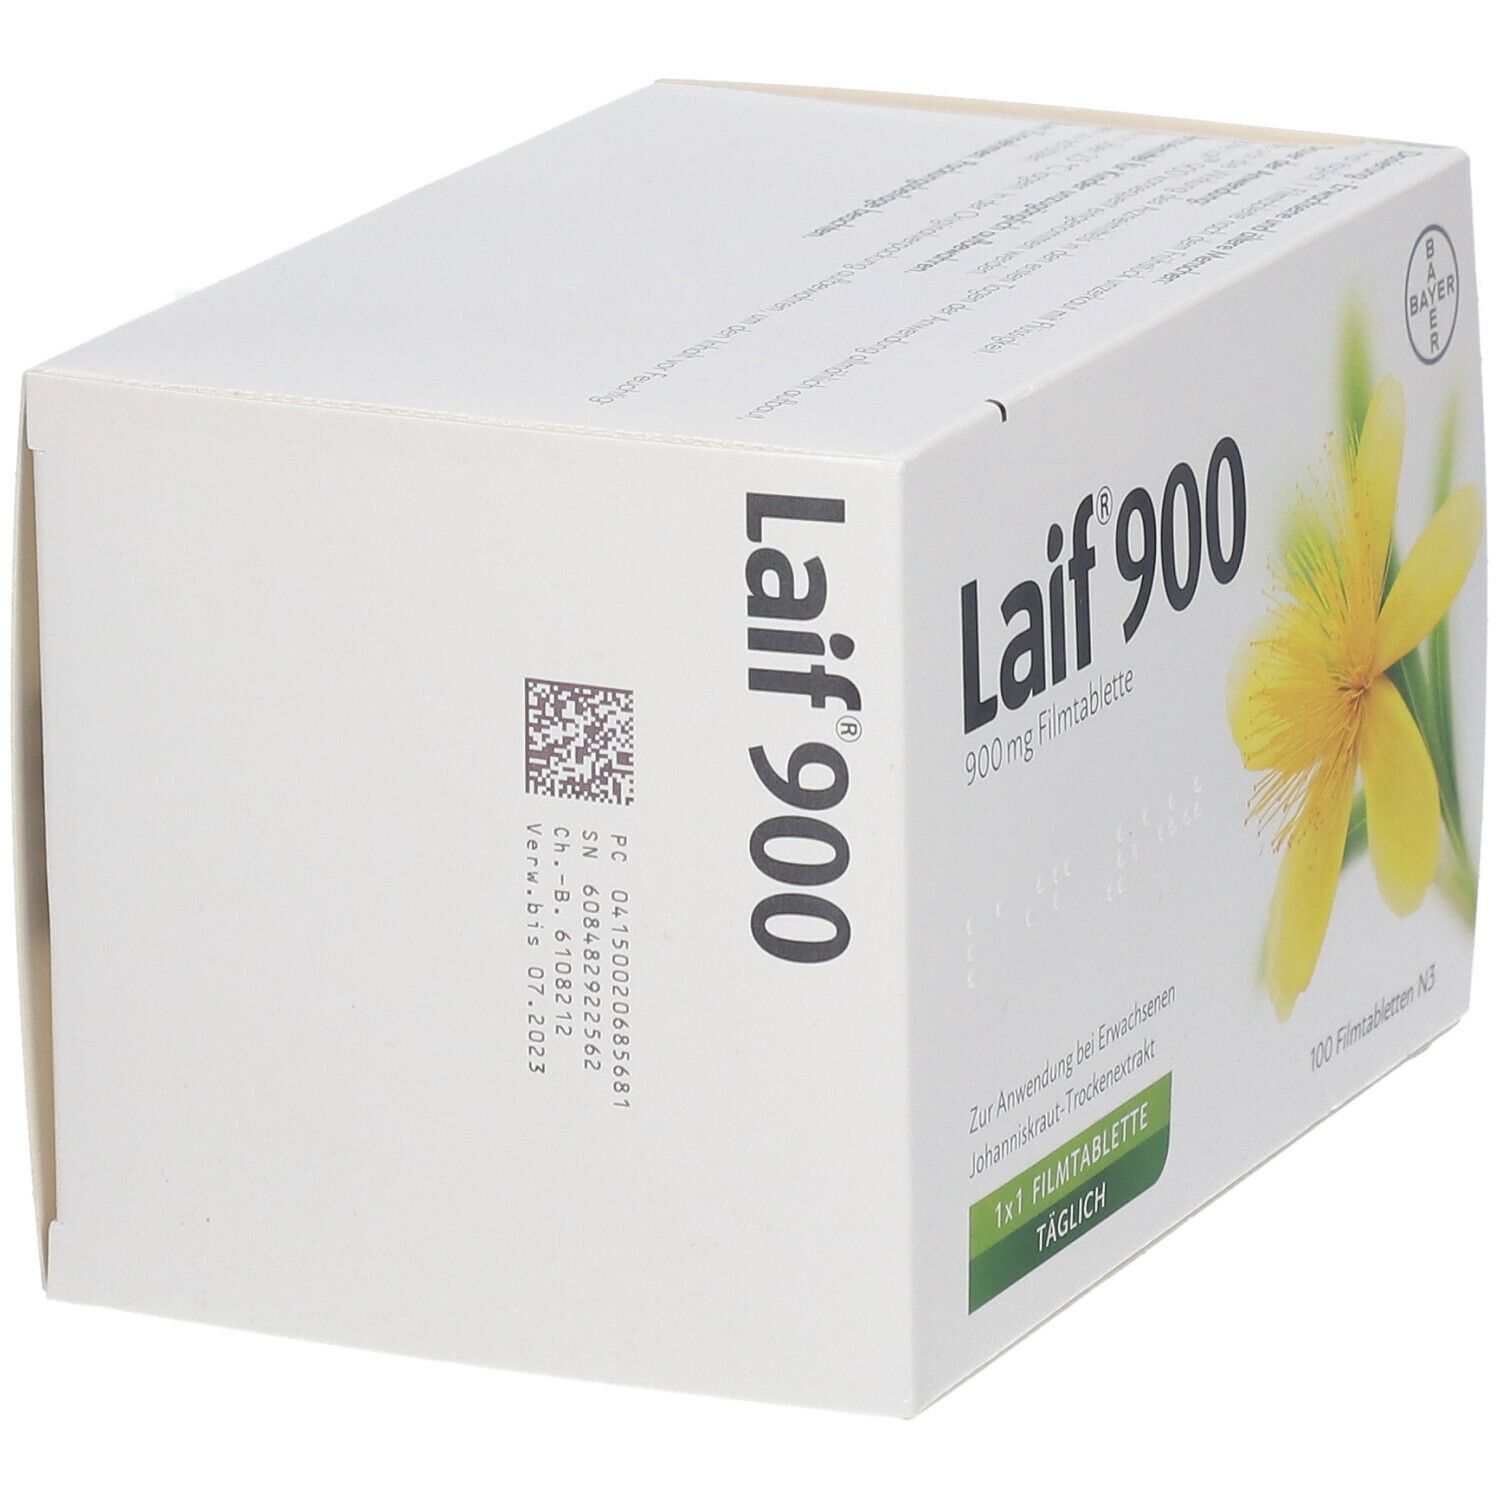 Laif® 900